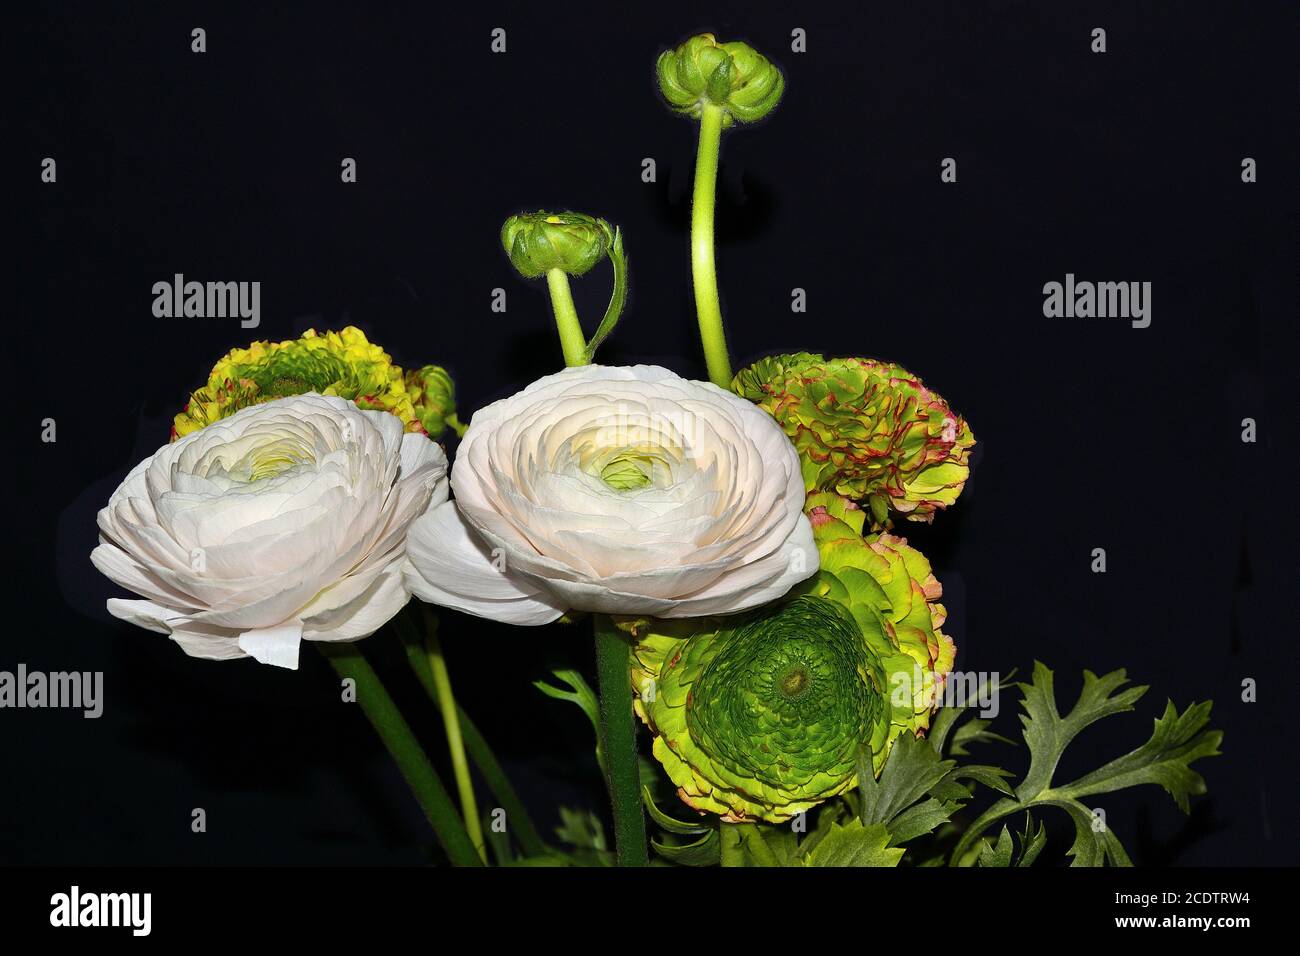 Bouquet of gentle ranunculus asiaticus flowers on a black background Stock Photo